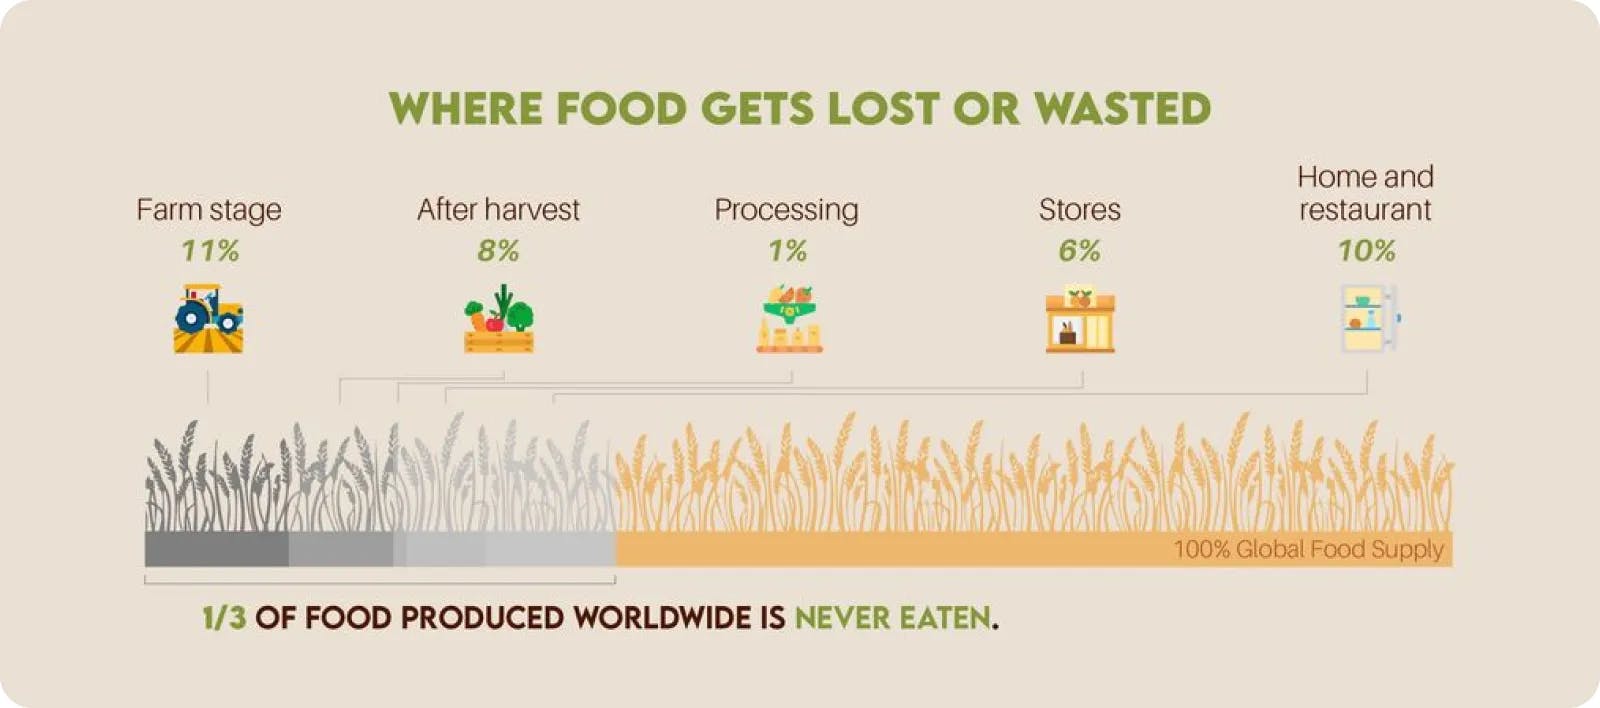 Where foods get lost or wasted